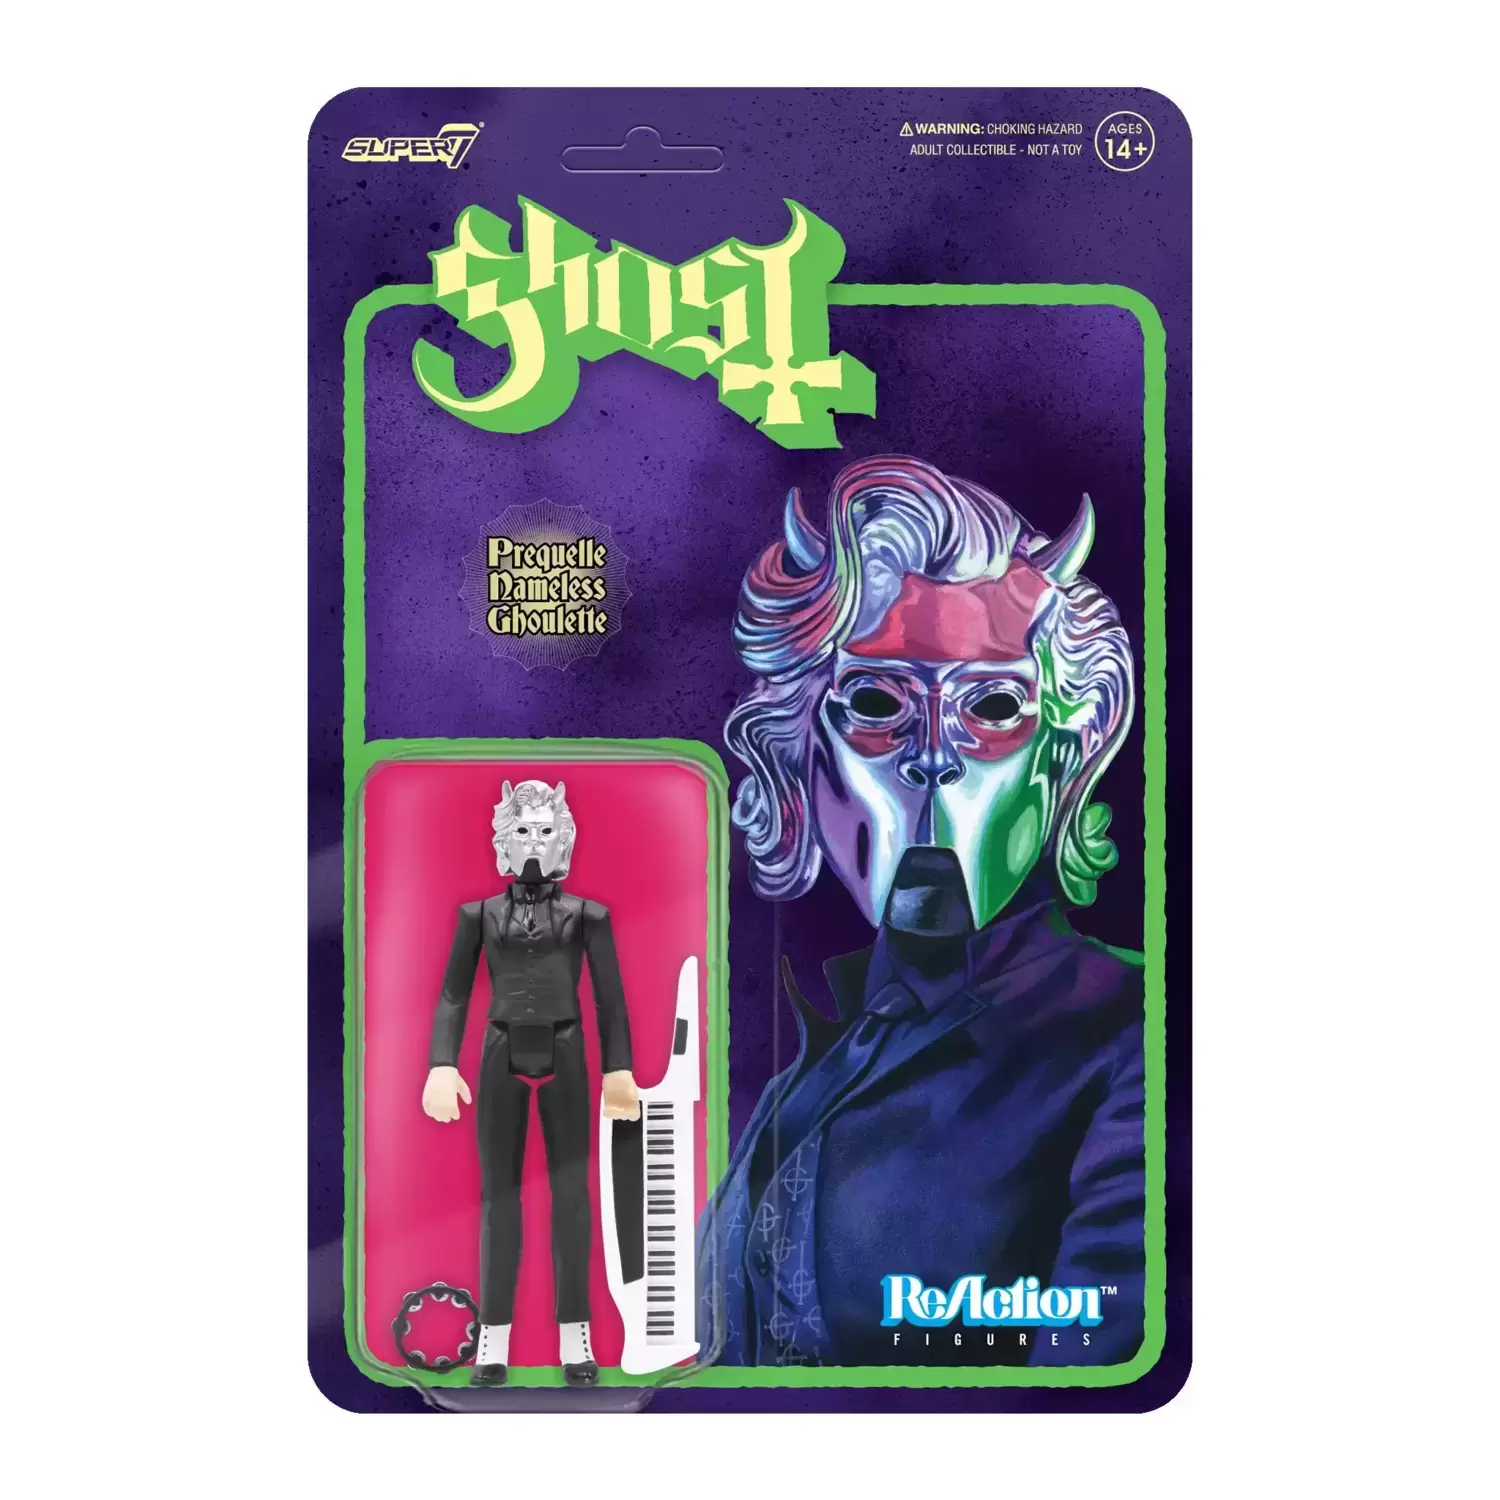 ReAction Figures - Ghost - Prequelle Nameless Ghoulette